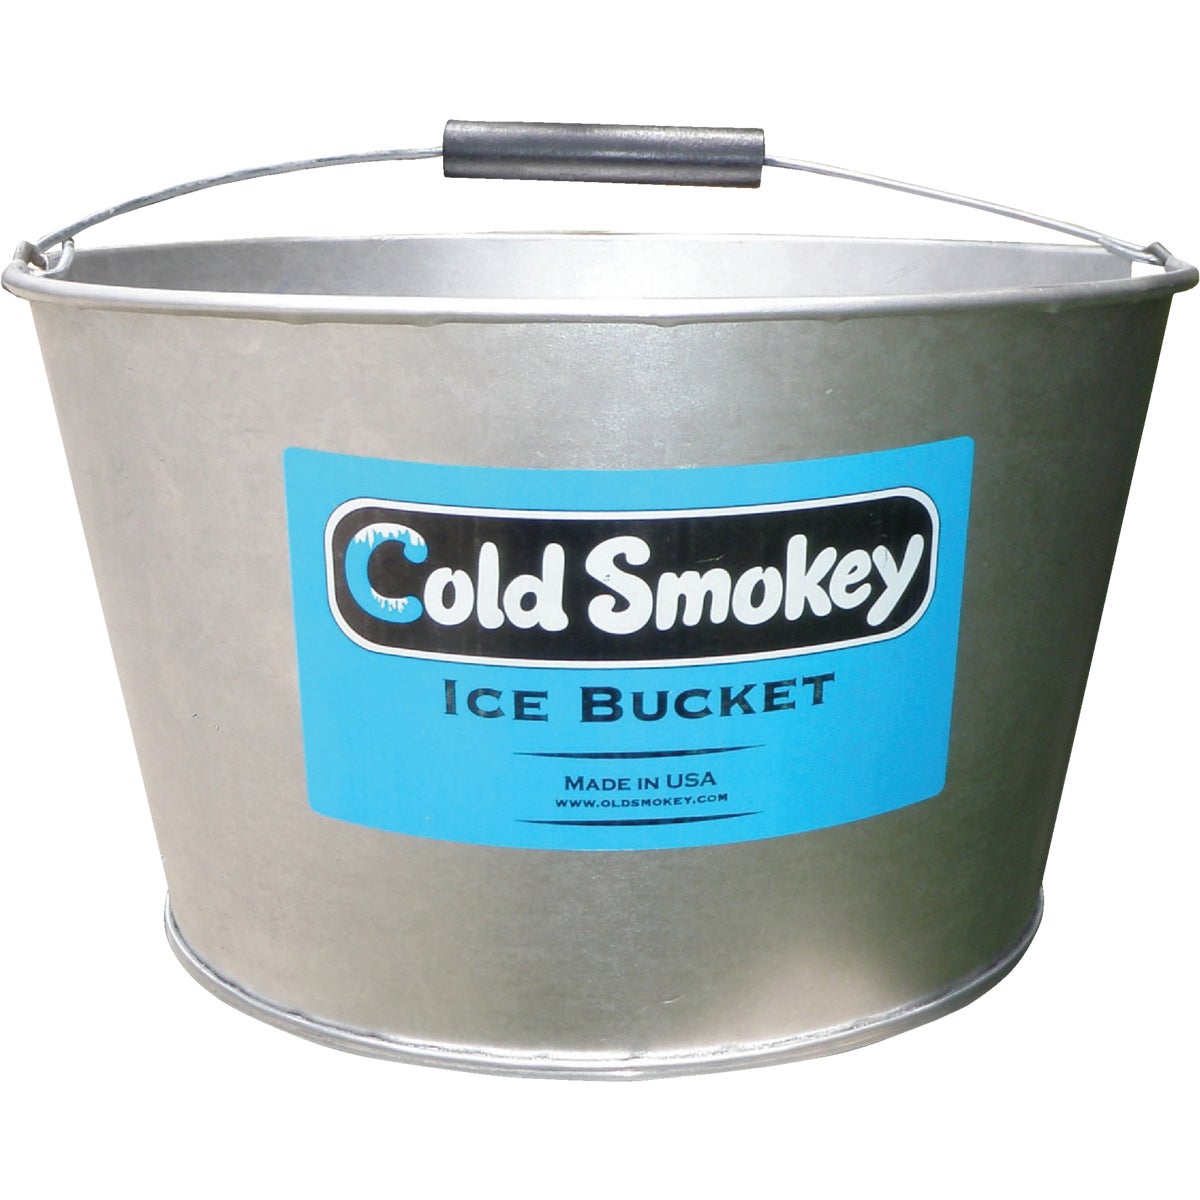 Old Smokey OS ICE BUCKET Cold Smokey 8 In. H. x 14 In. Dia. Aluminized Steel Ice Bucket OS ICE BUCKET